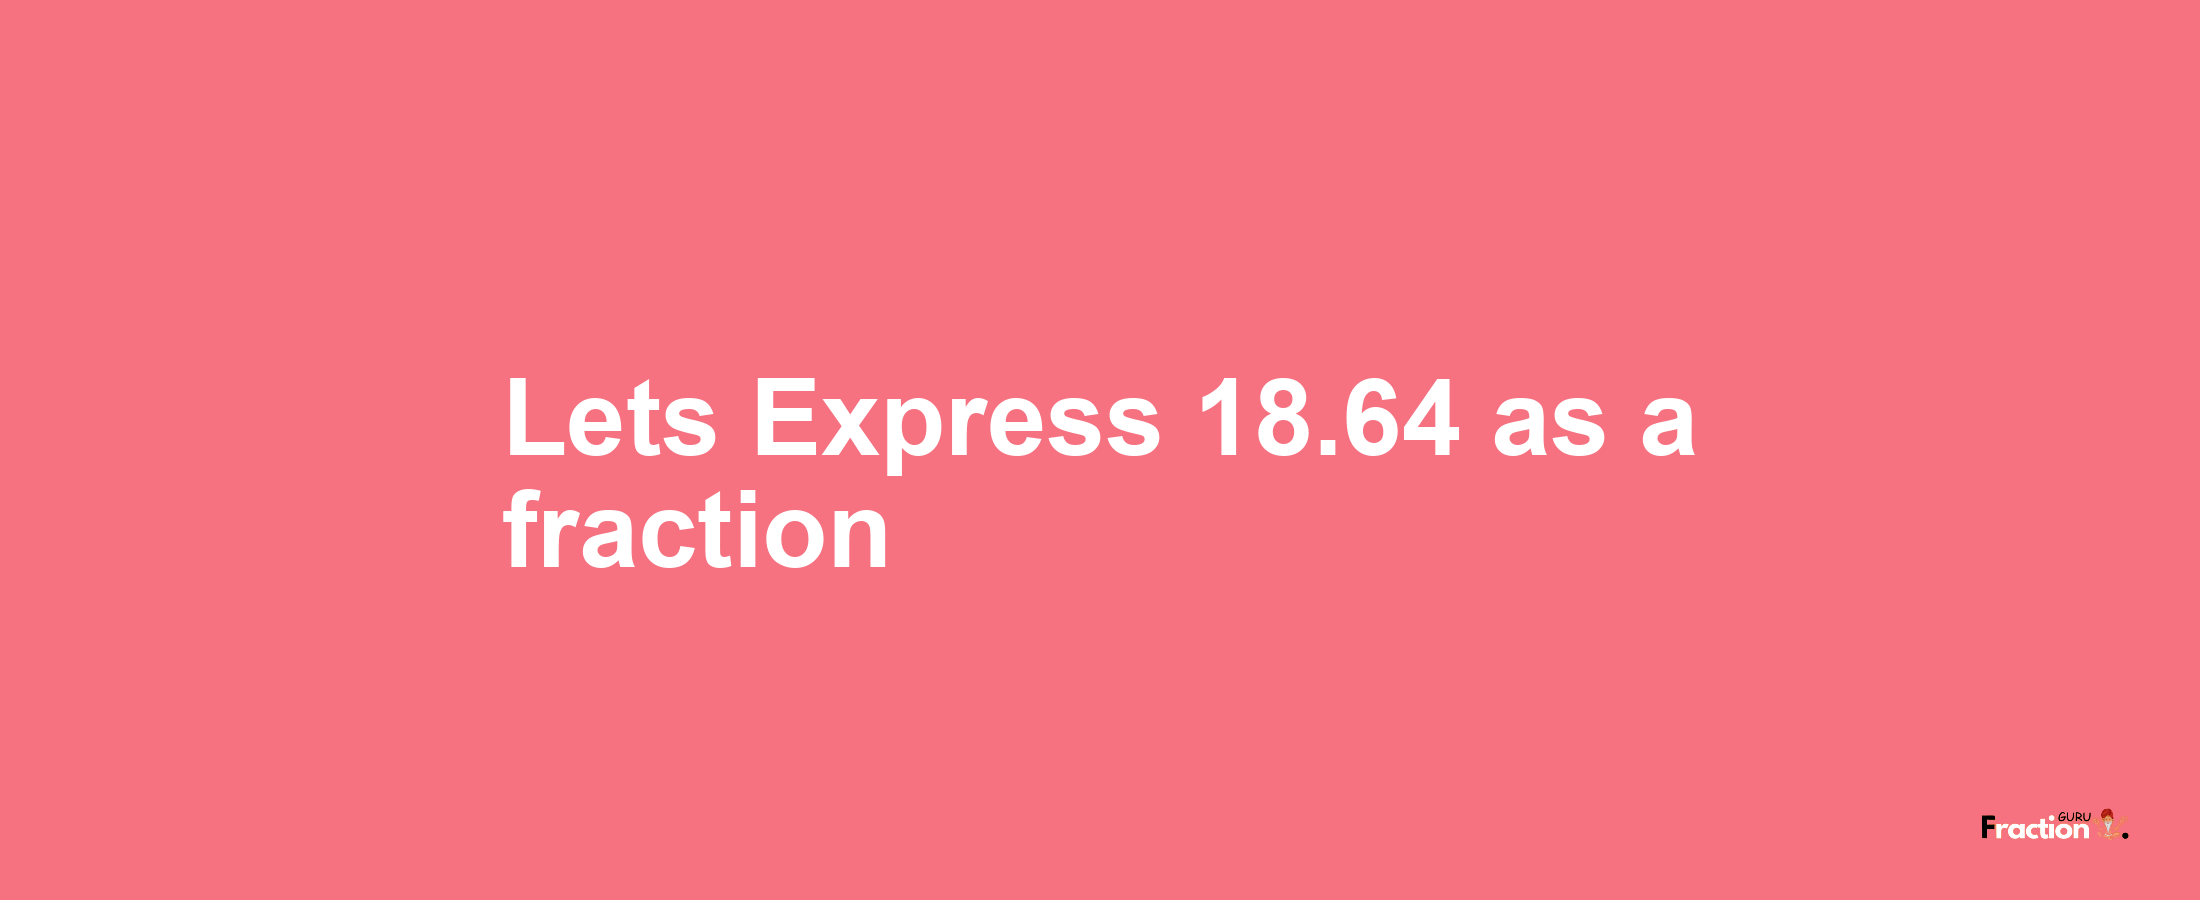 Lets Express 18.64 as afraction